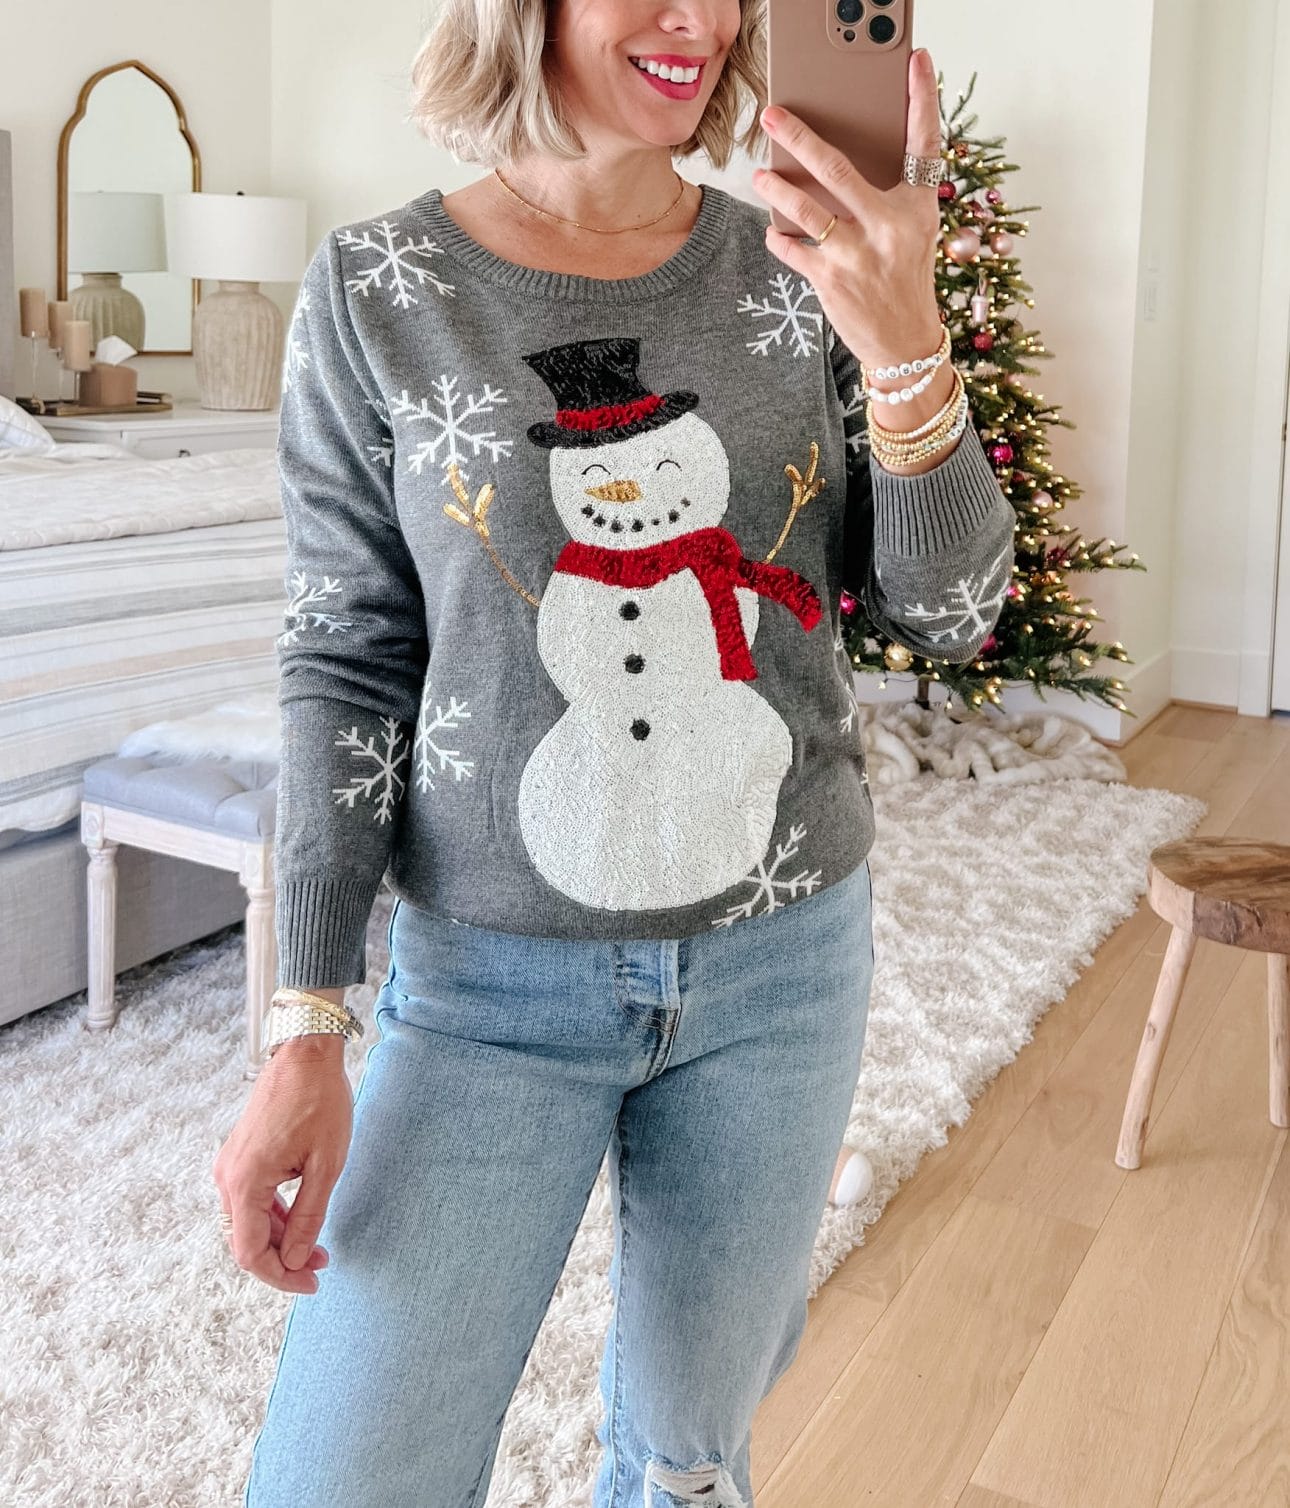 Snowman Sweater, Jeans, white Booties